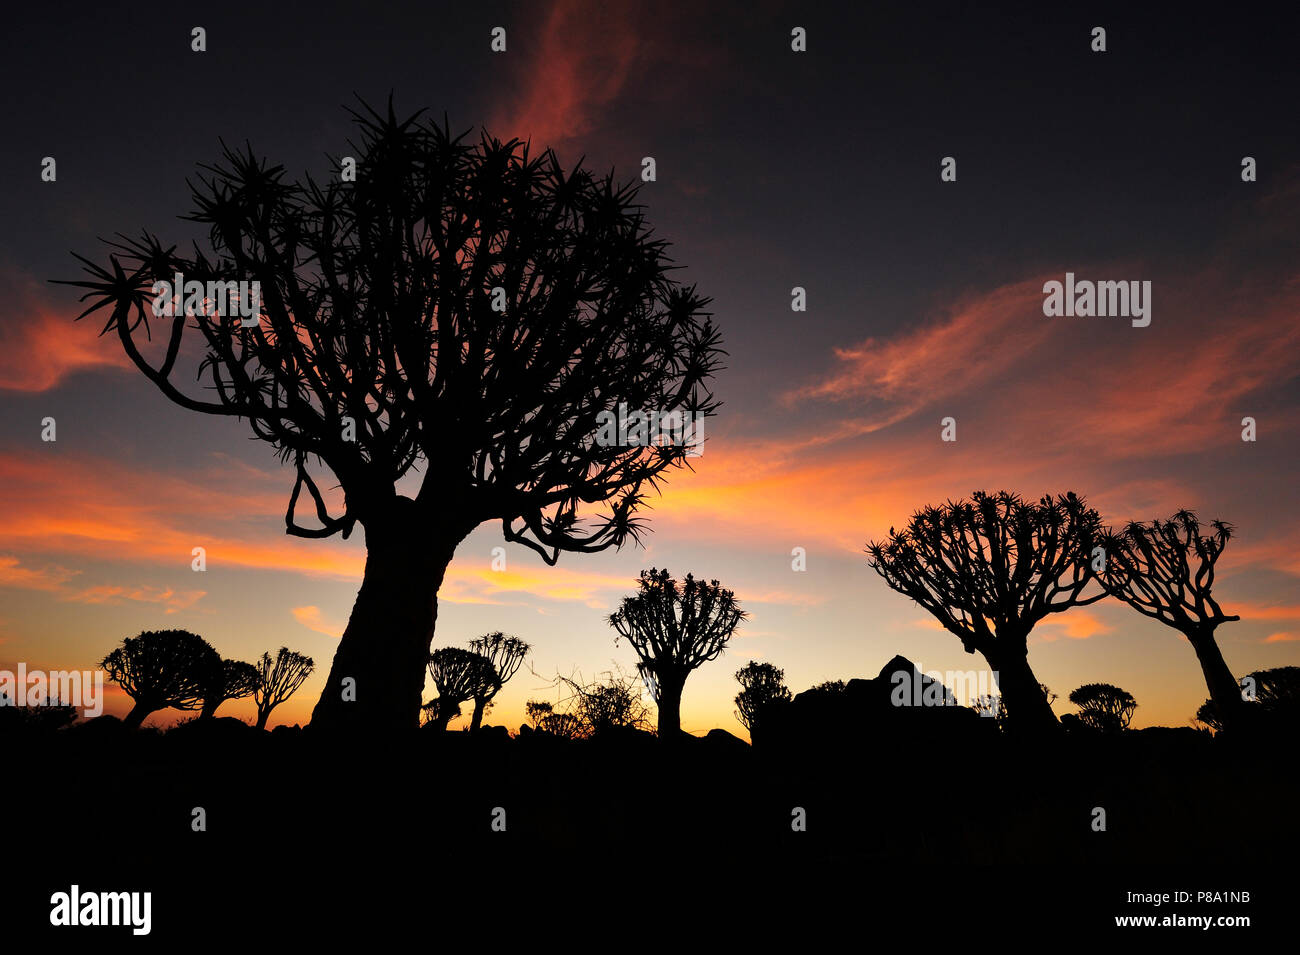 Quiver tree (Aloe dichotoma), forest, silhouettes in sunset, Keetmanshoop, Karas, Namibia Stock Photo